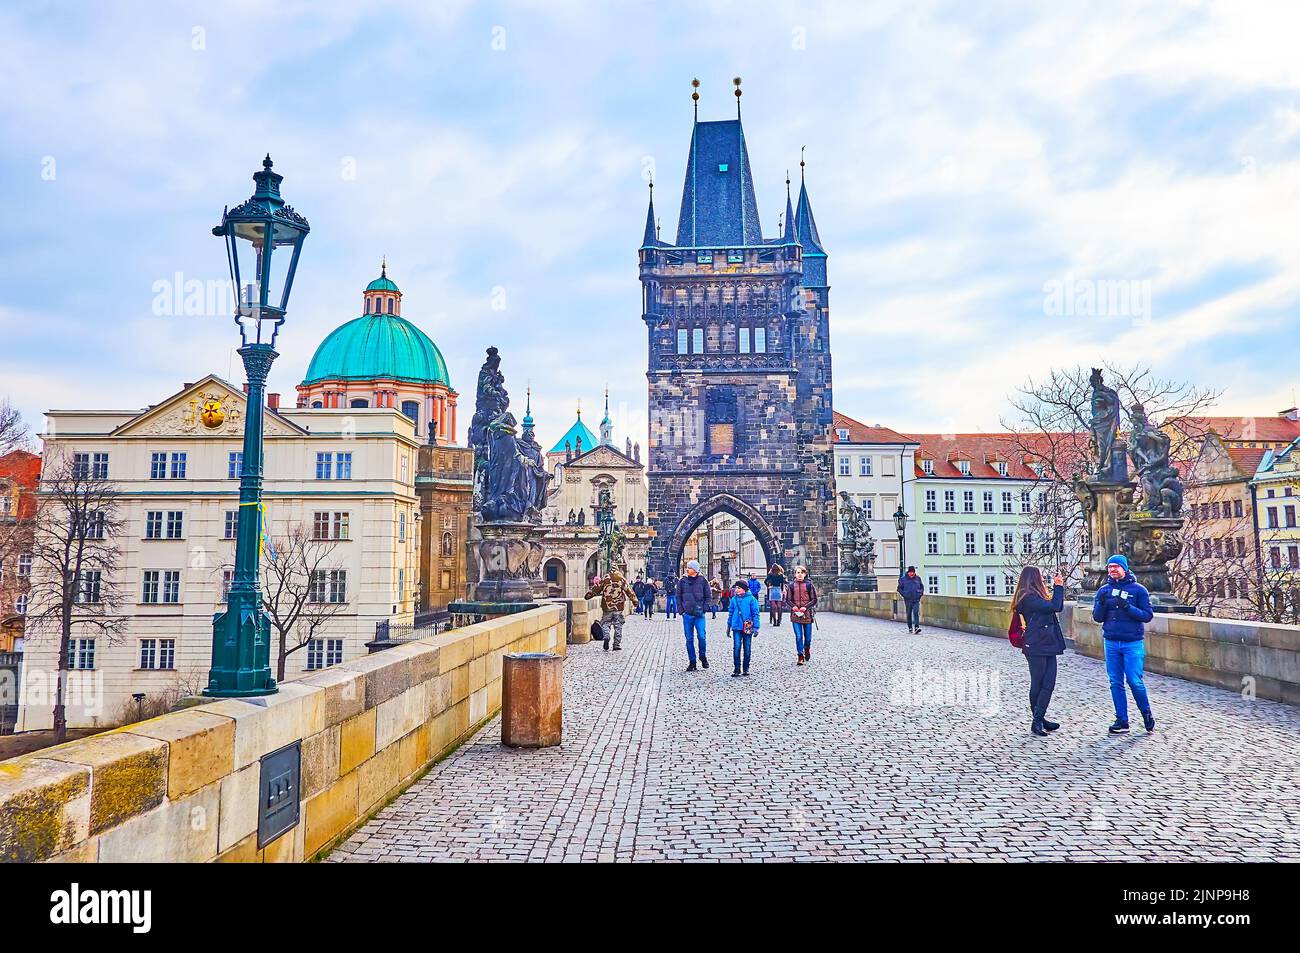 PRAGUE, CZECH REPUBLIC - MARCH 6, 2022:  The stone Gothic Old Town Bridge Tower on the Charles Bridge with beautiful stone sculptures on both sides, o Stock Photo